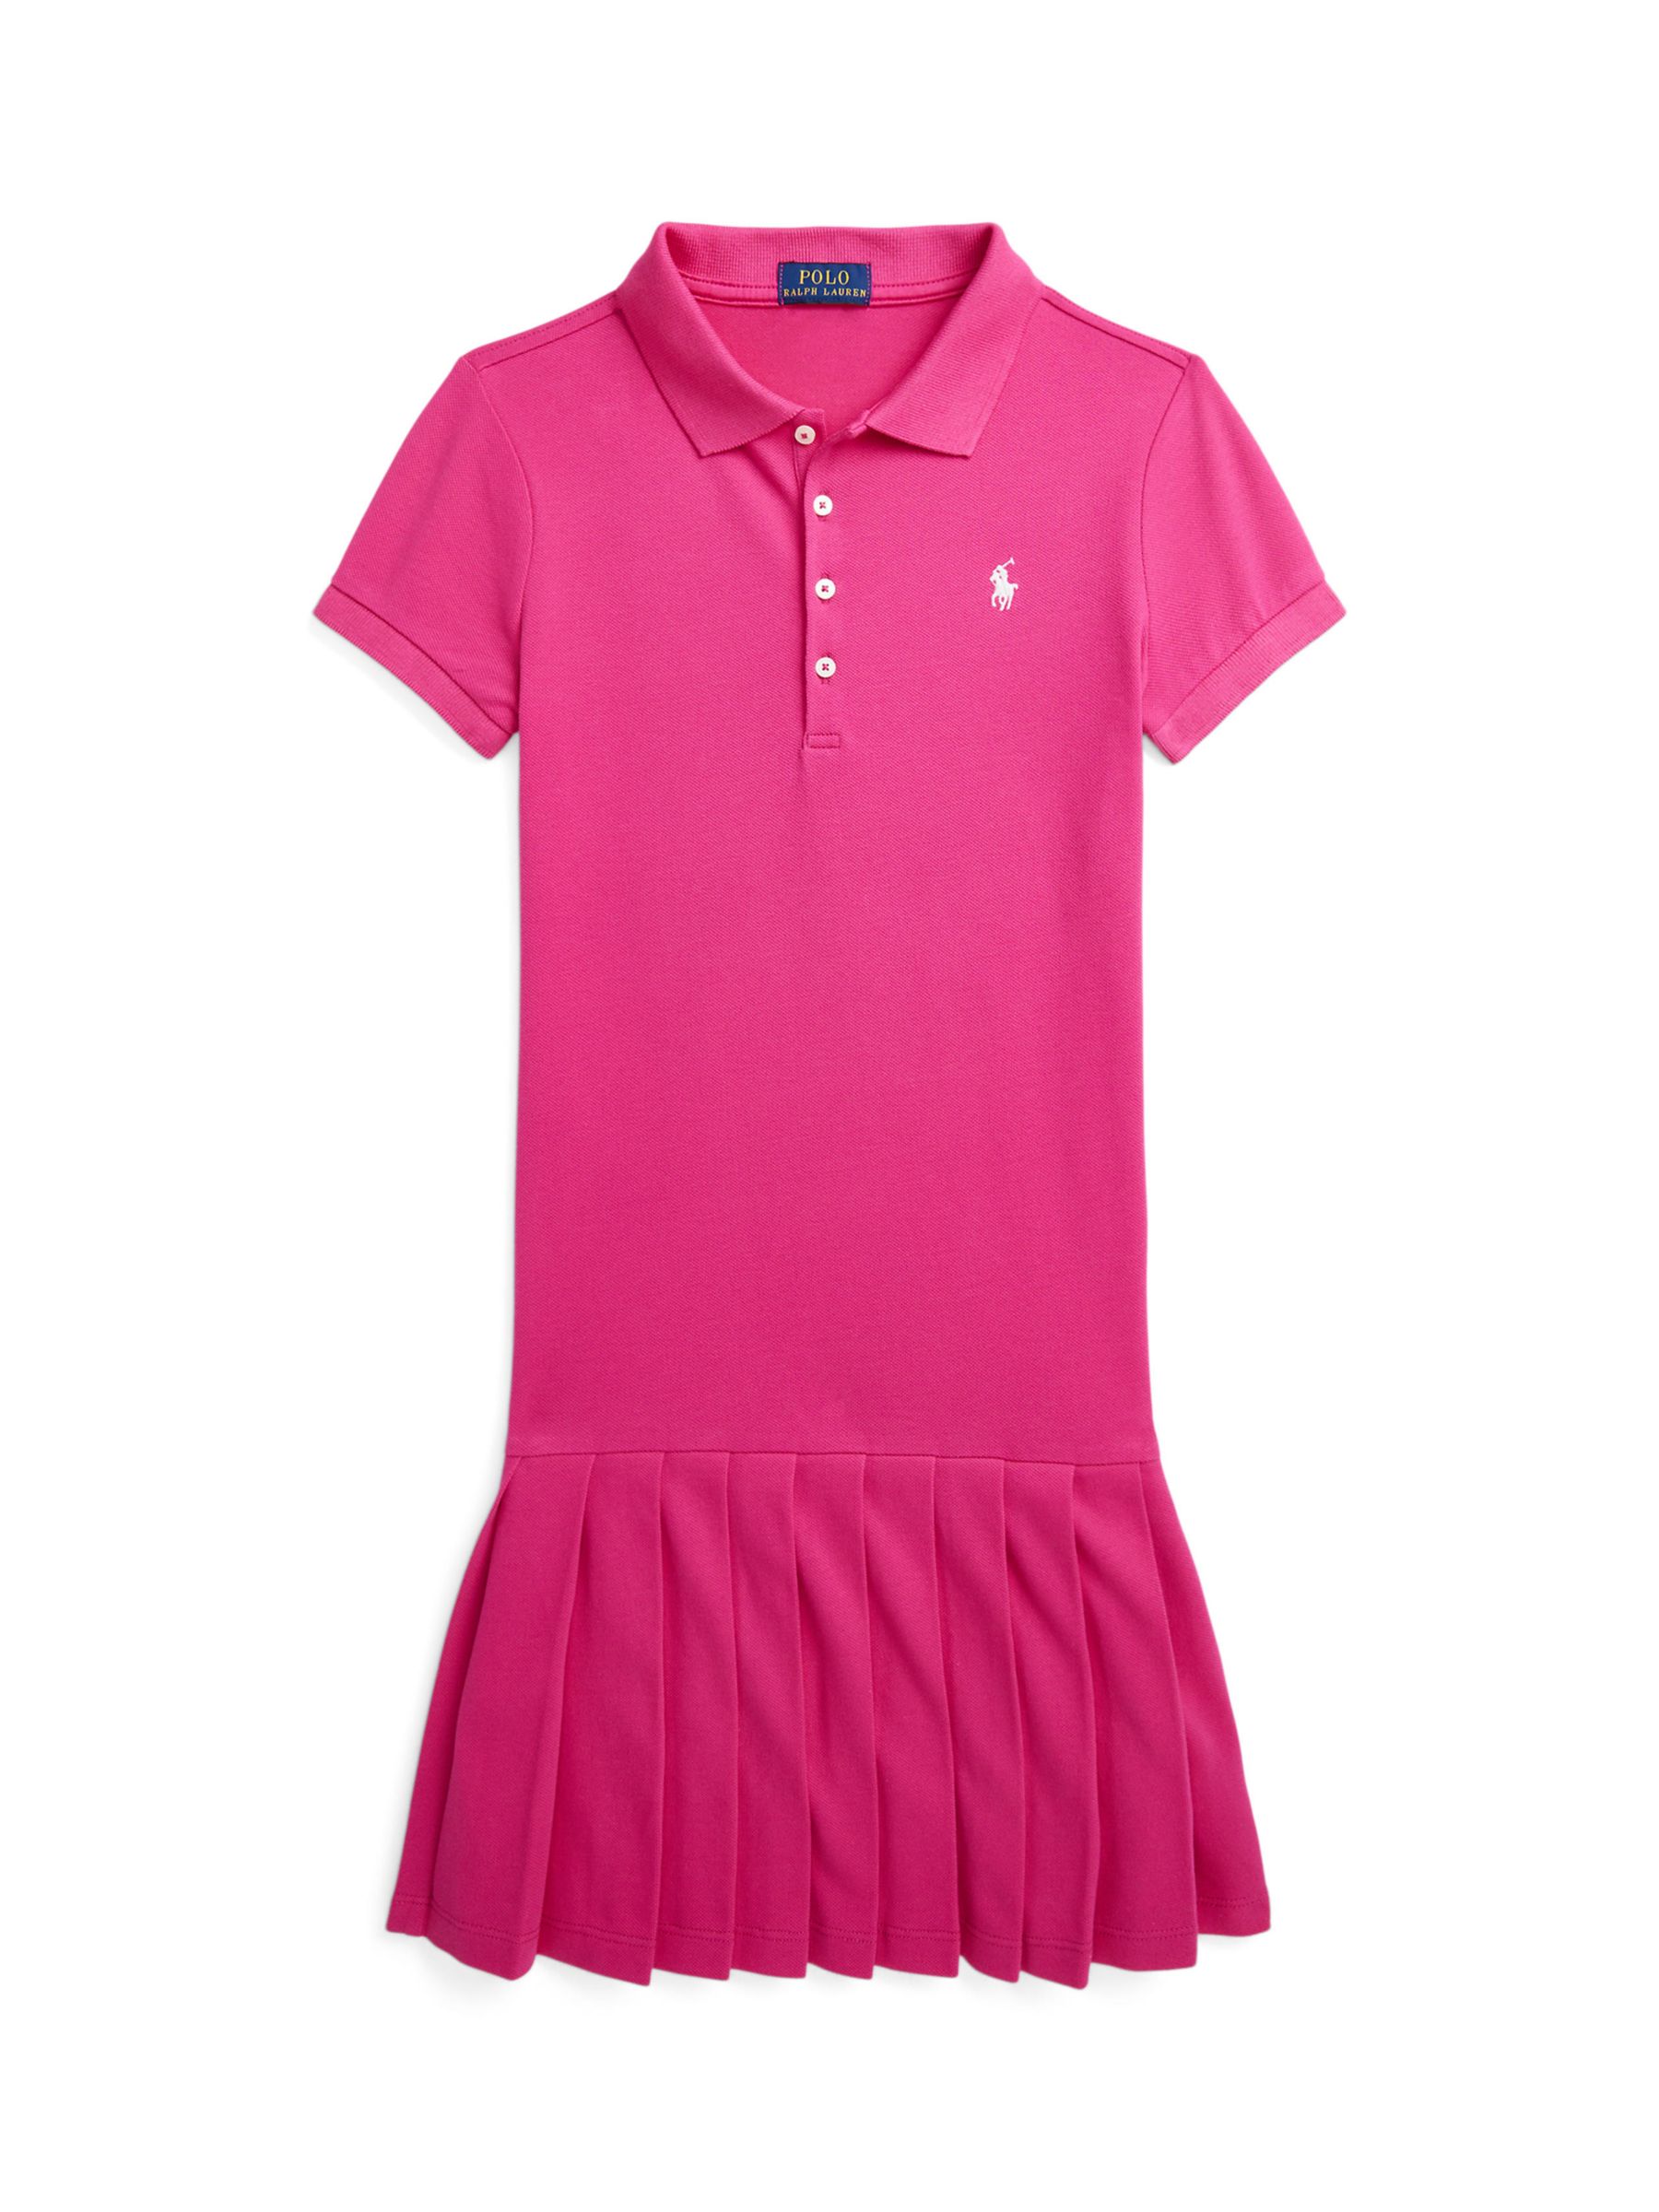 Ralph Lauren Kids' Pleated Polo Dress, Bright Pink, 4 years